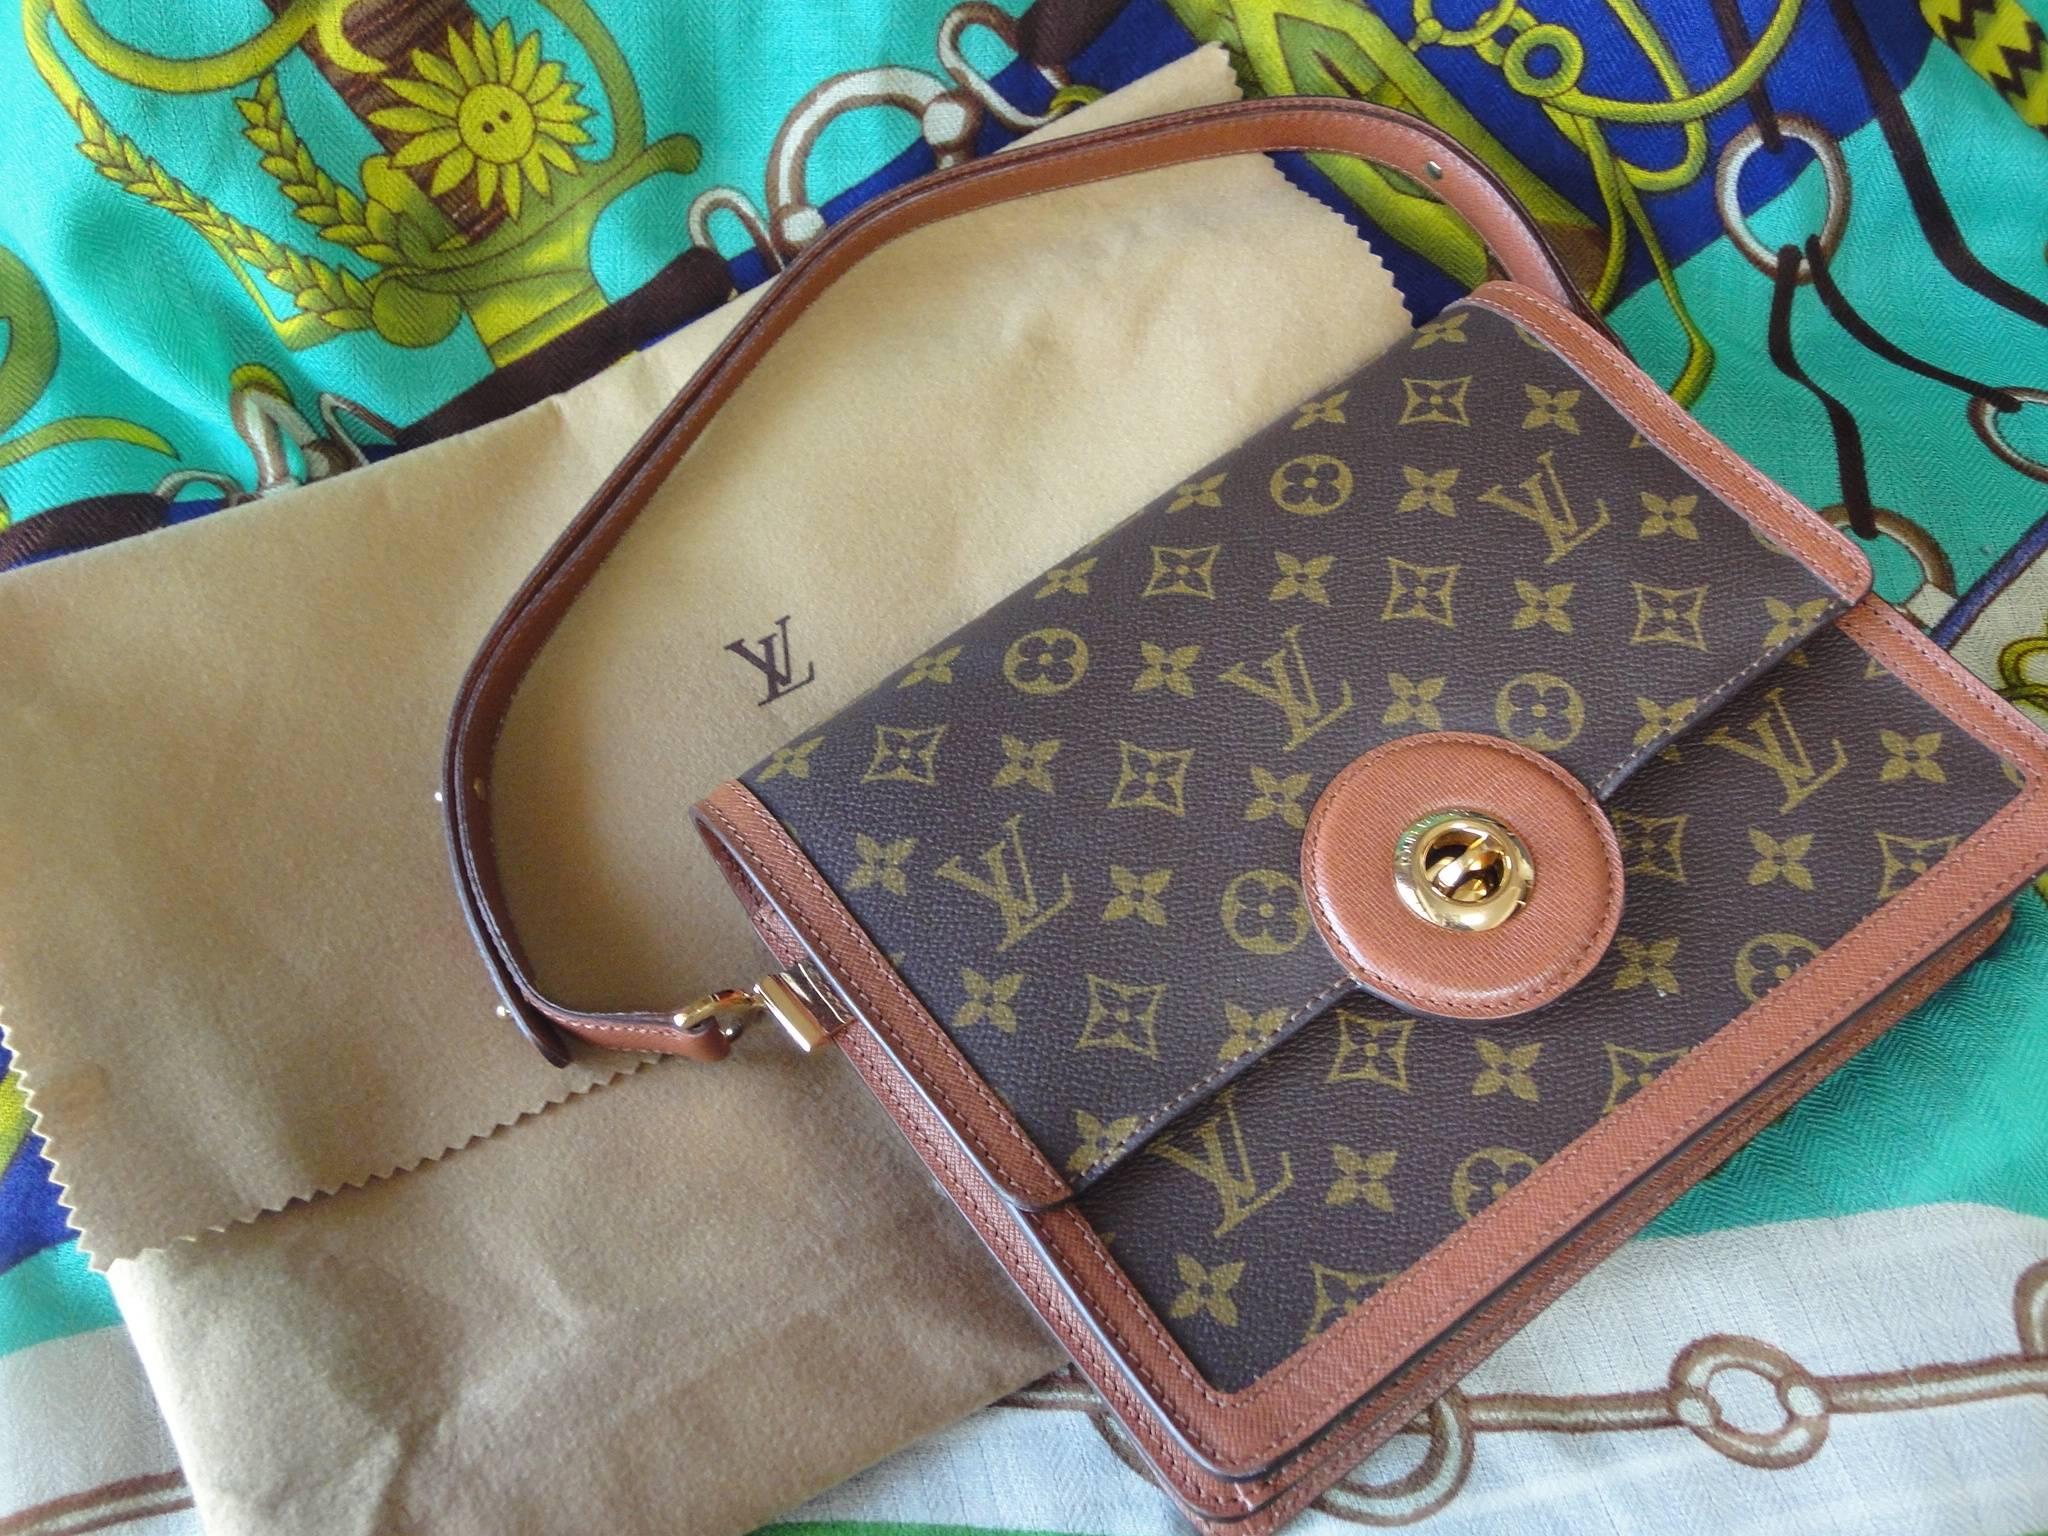 Vintage Louis Vuitton rare brown and monogram shoulder purse with bullet eye turn lock closure. Chic and mod LV vintage bag.

Here is another rare vintage handbag from Louis Vuitton, monogram shoulder bag with eye bullet-like closure.

Fabulous